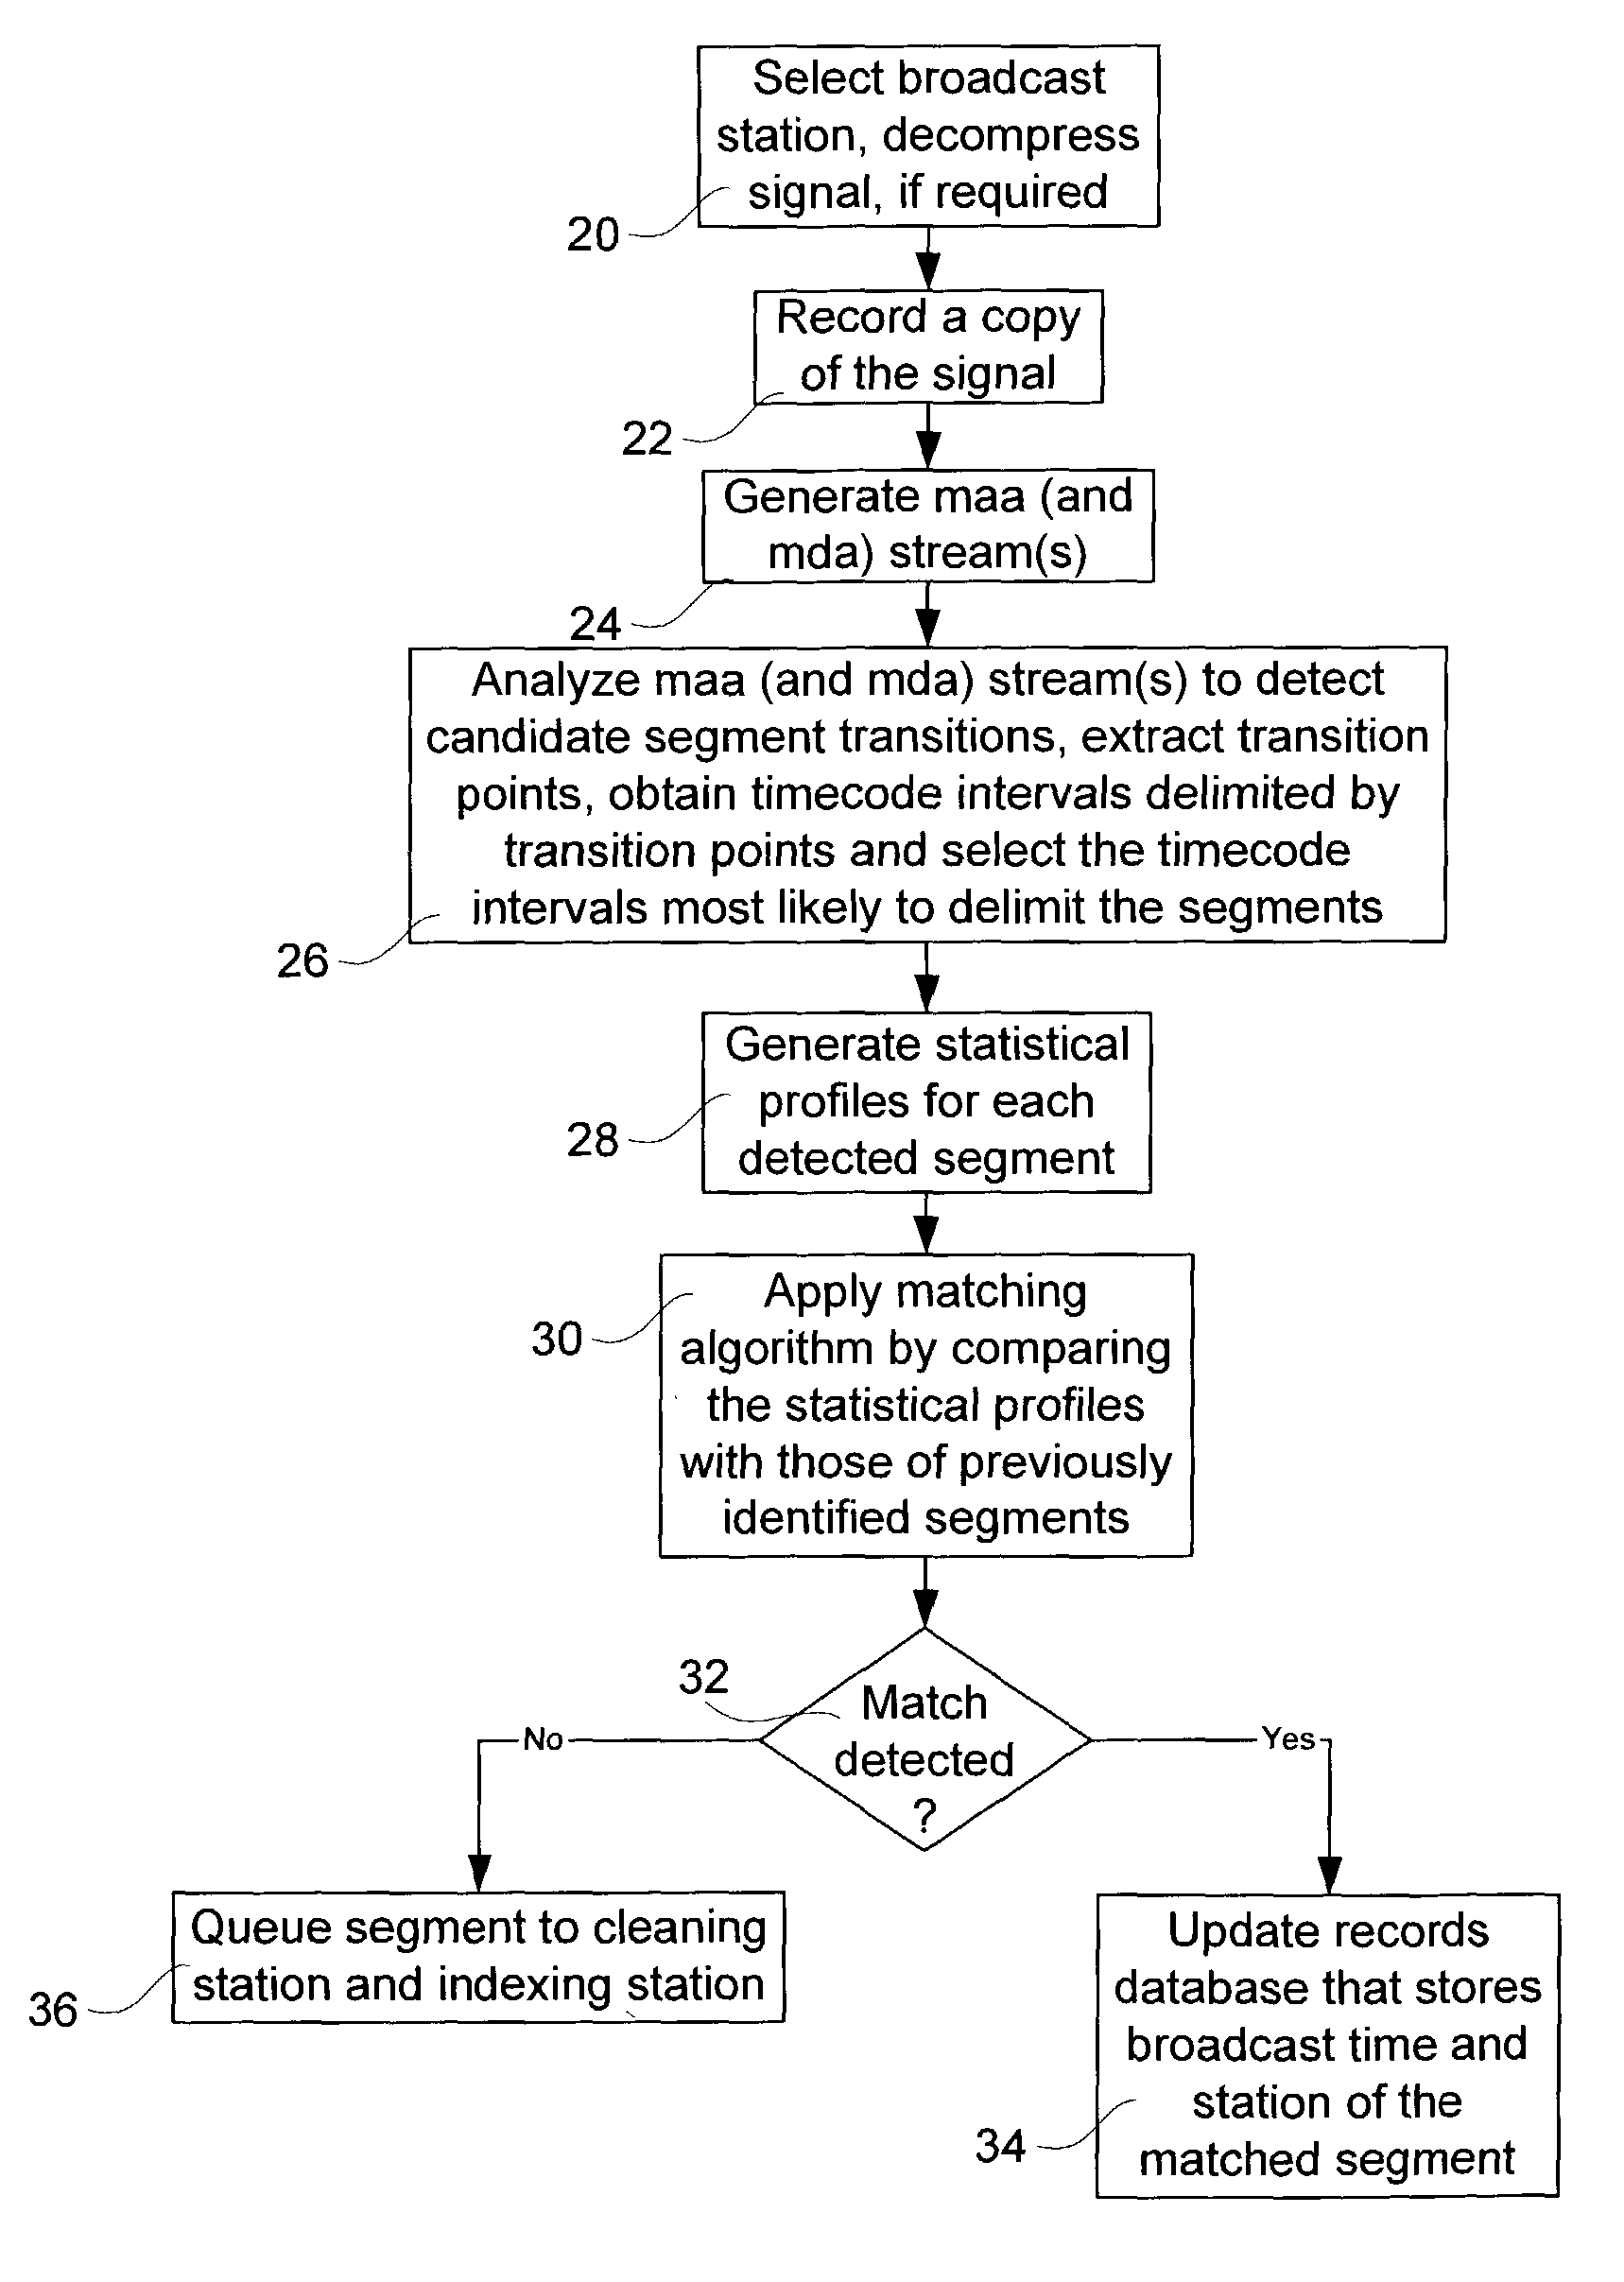 Method and system for re-identifying broadcast segments using statistical profiles